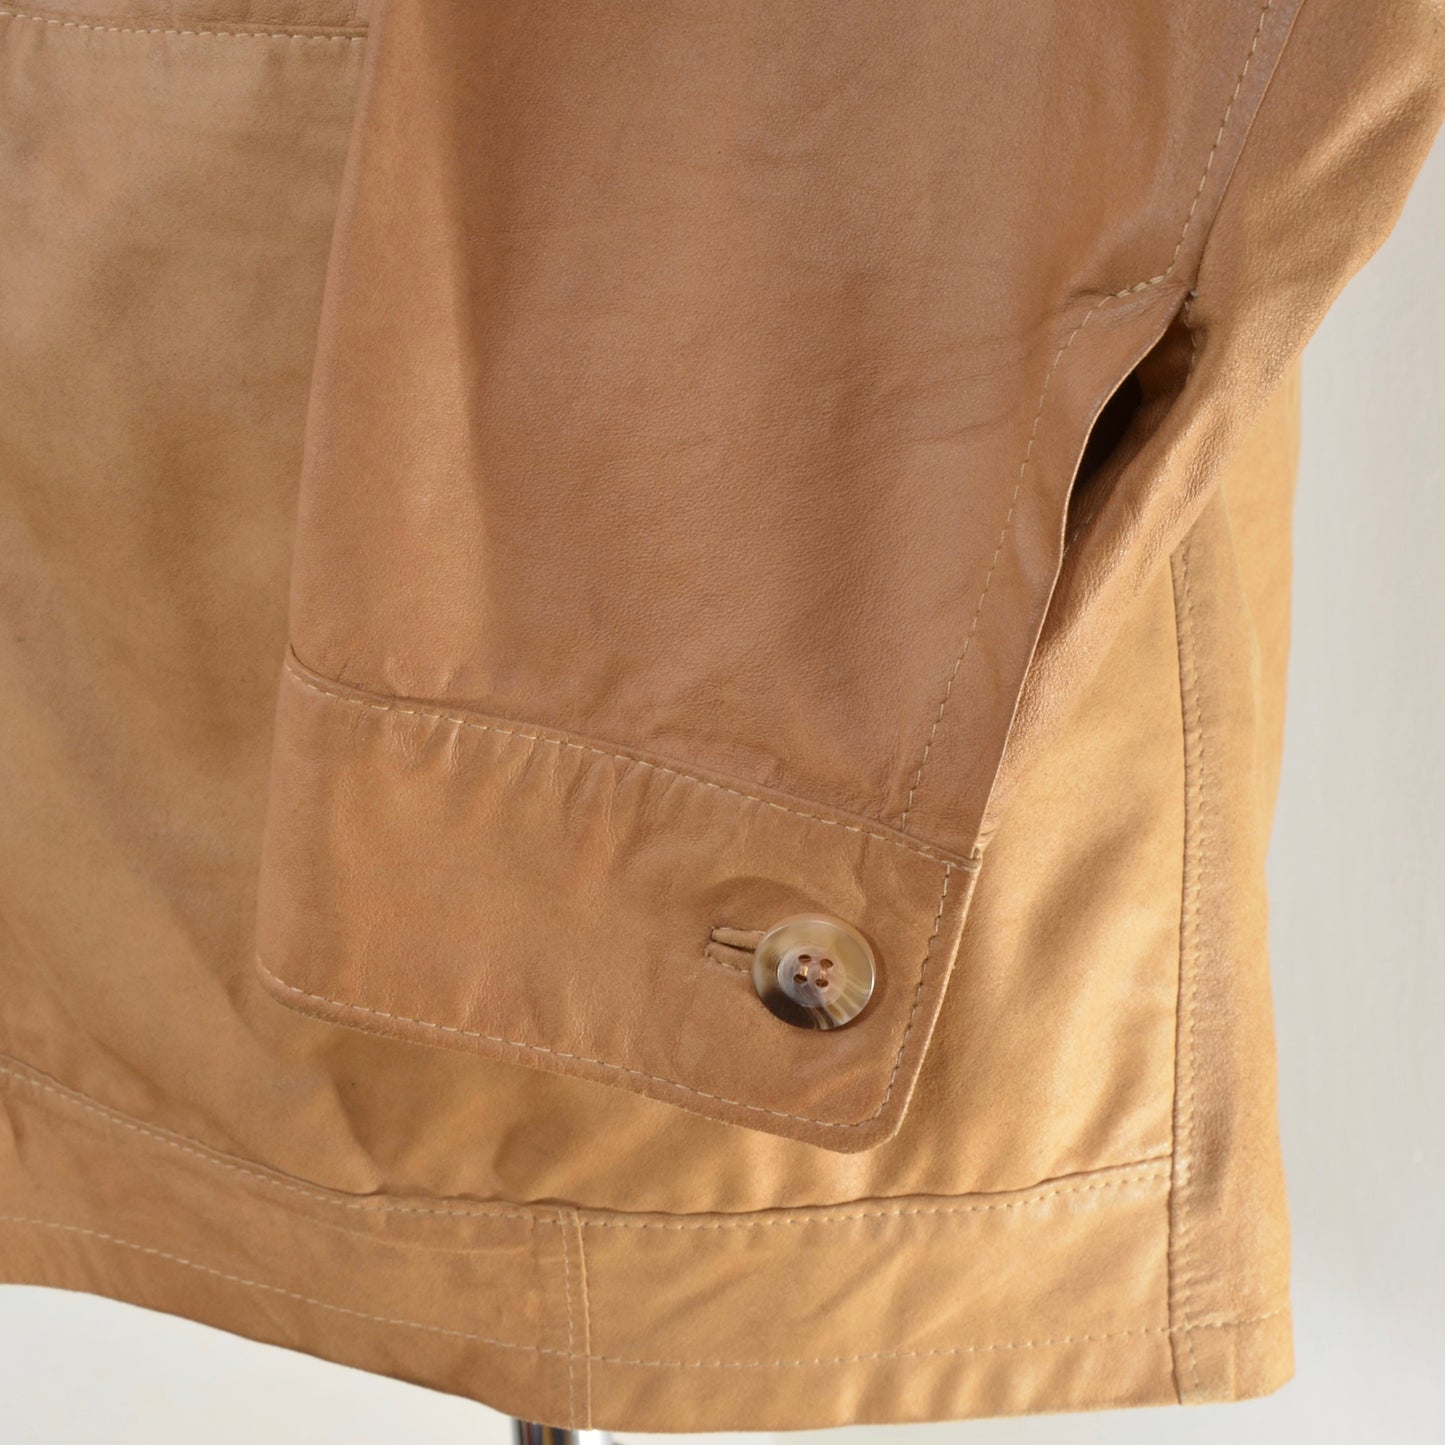 Marchiol Unlined Leather Jacket Size 54 - Tan